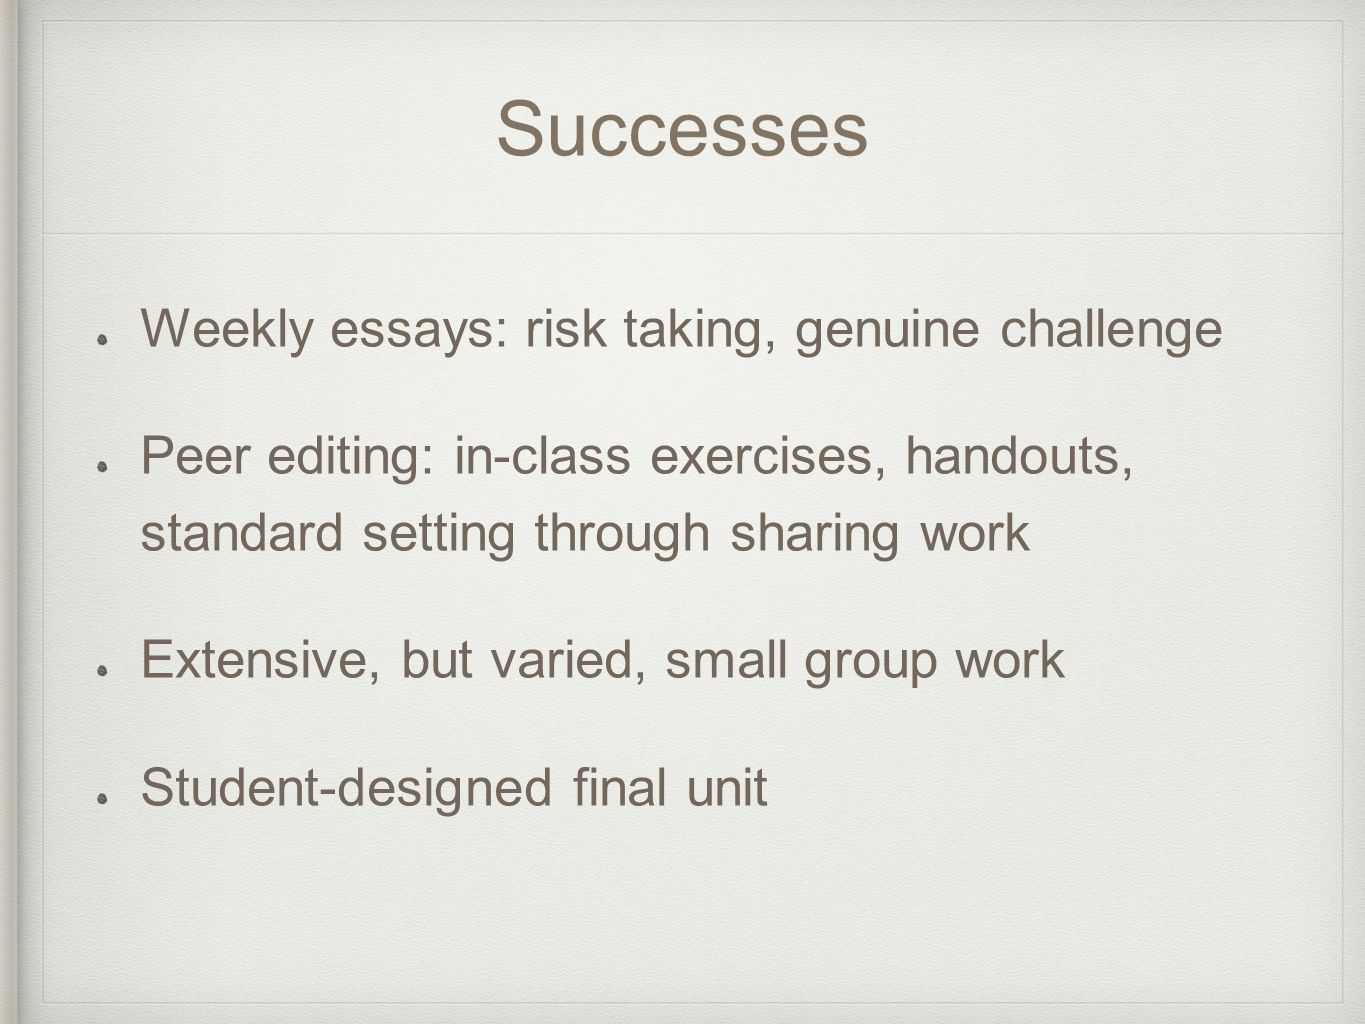 Successes Weekly essays: risk taking, genuine challenge Peer editing: in-class exercises, handouts, standard setting through sharing work Extensive, but varied, small group work Student-designed final unit